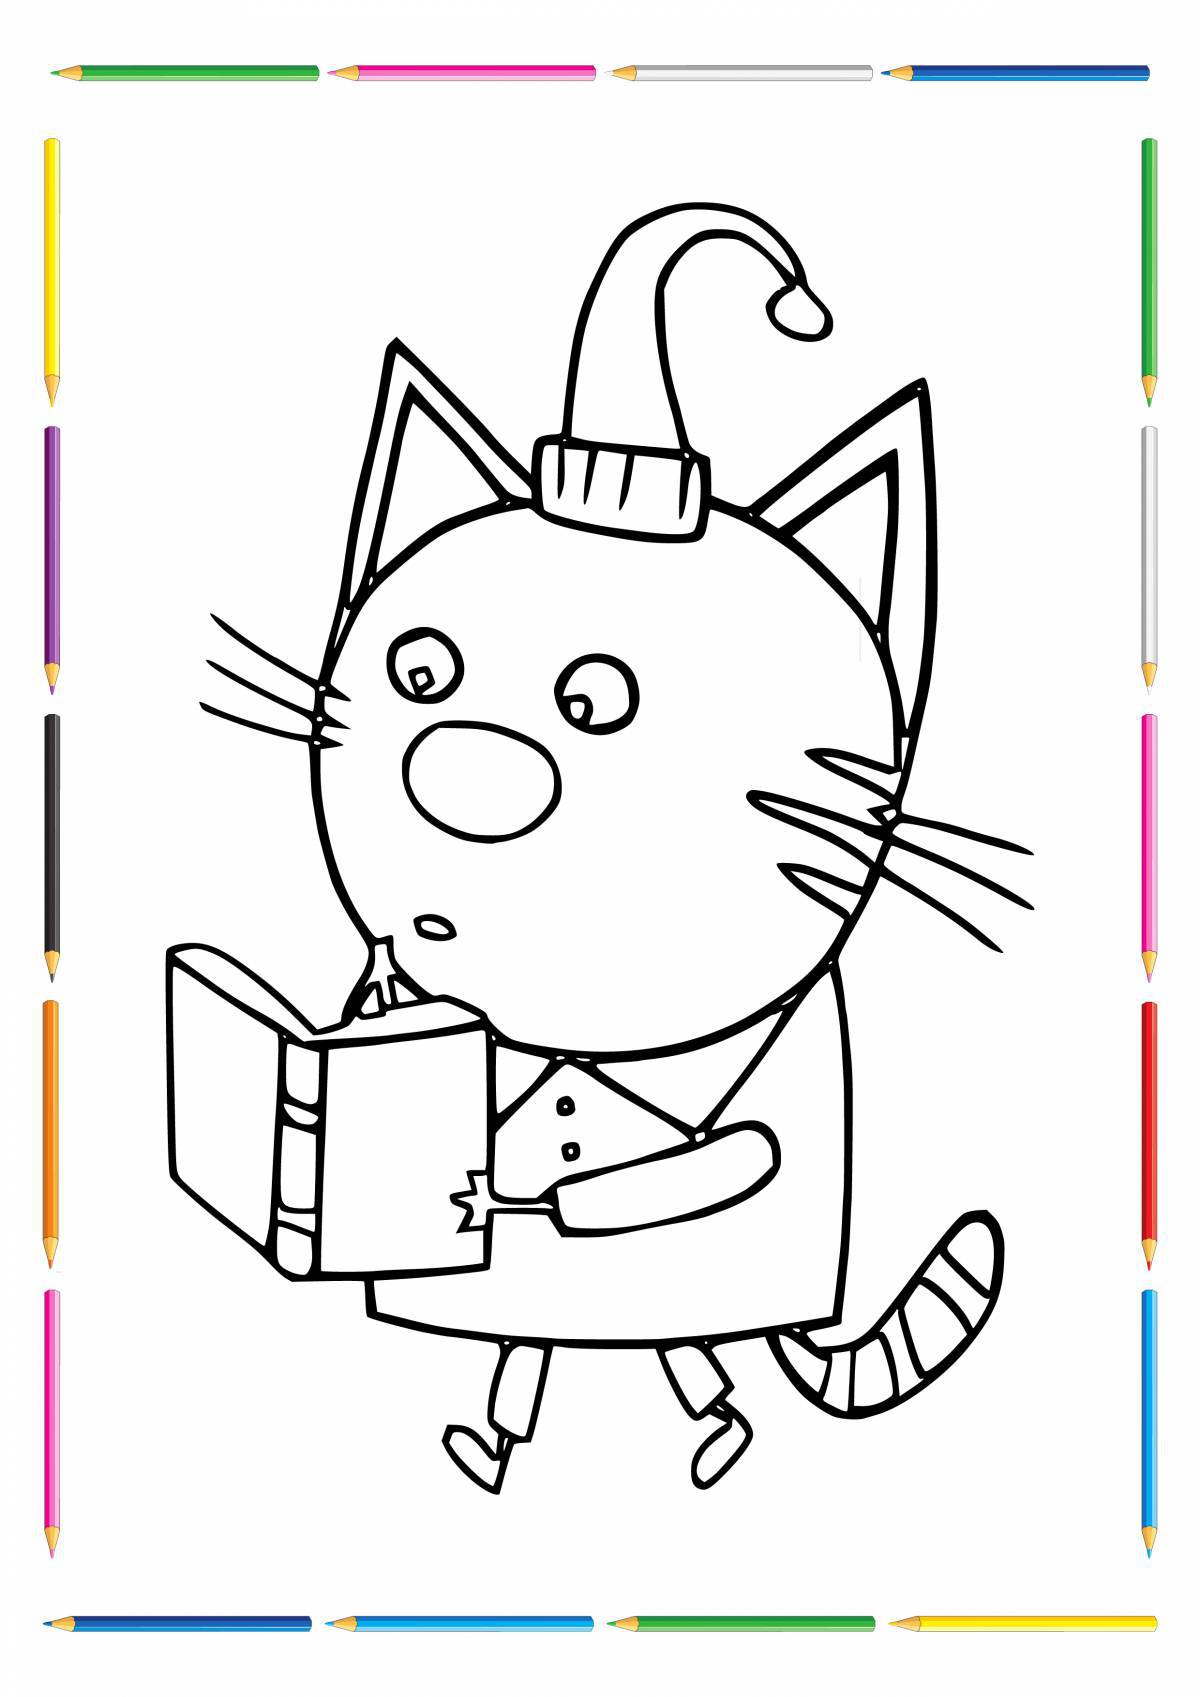 Fun coloring 3 cats for the little ones